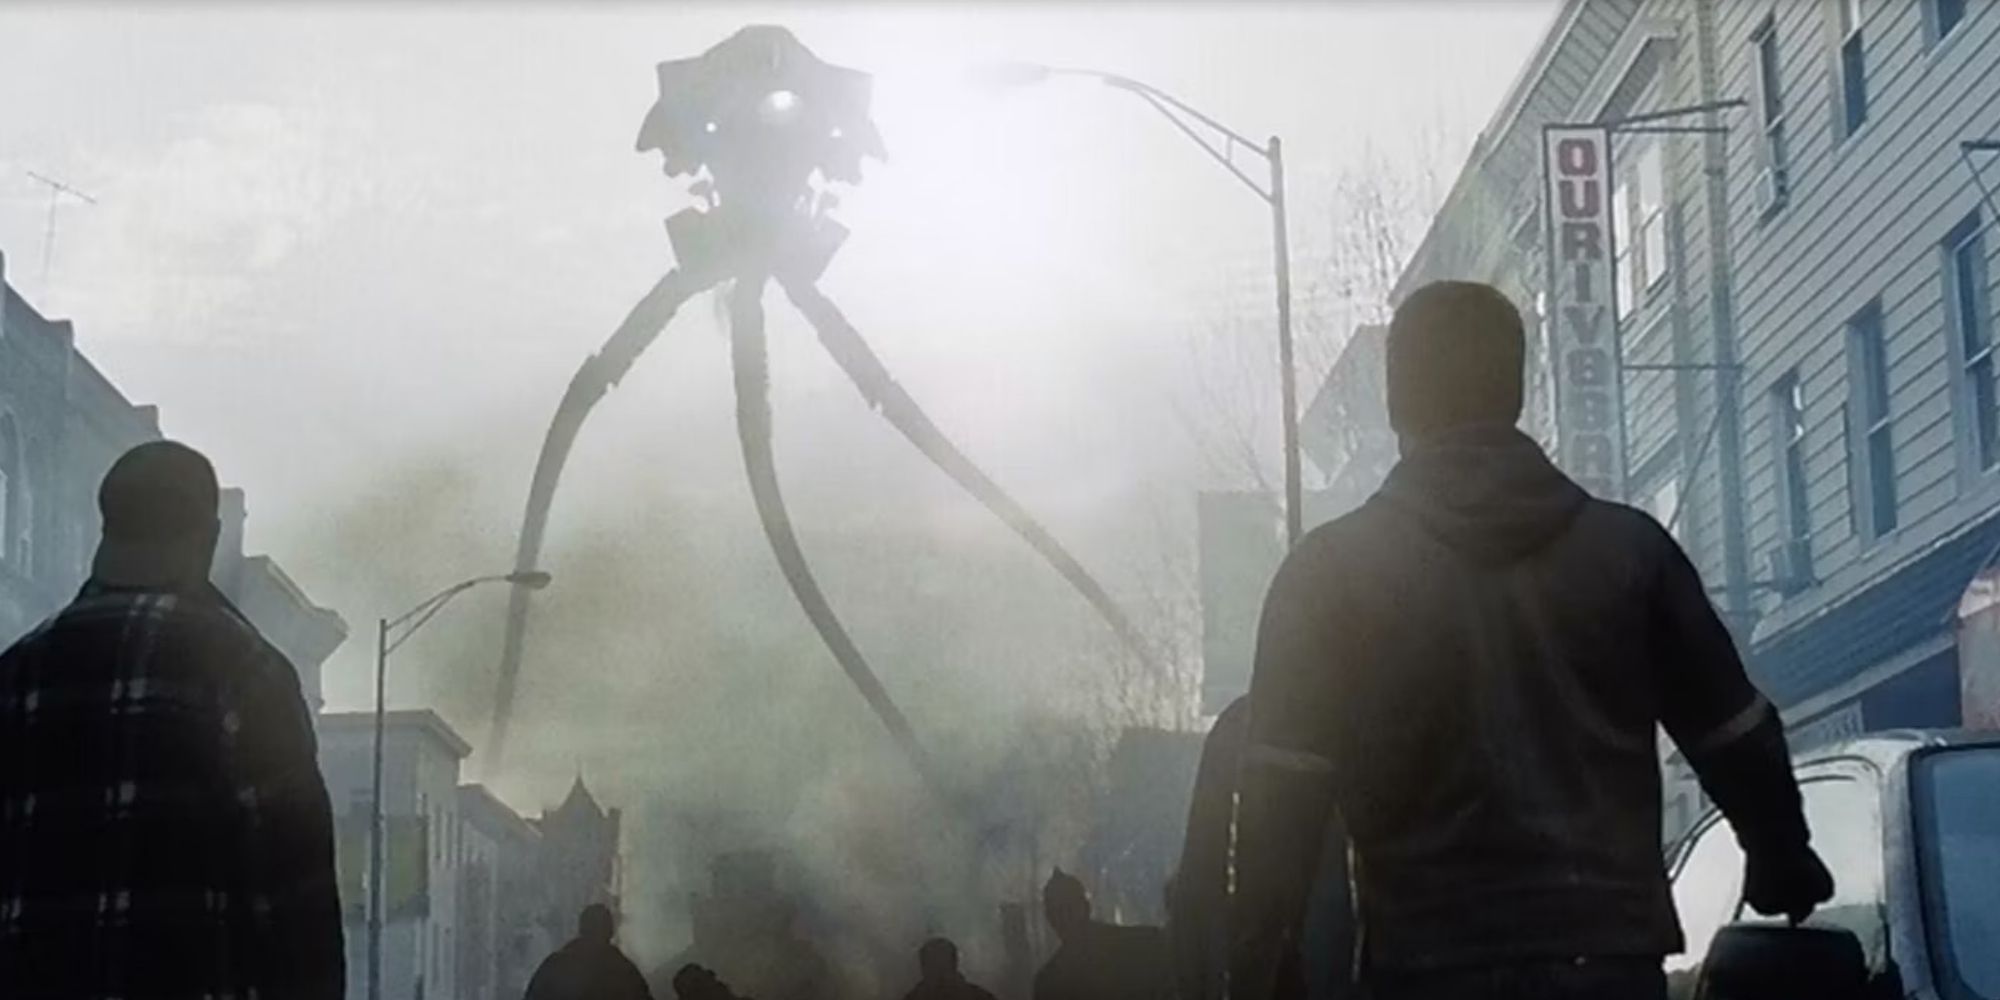 A martian tripod stands over the city in 'War of the Worlds'